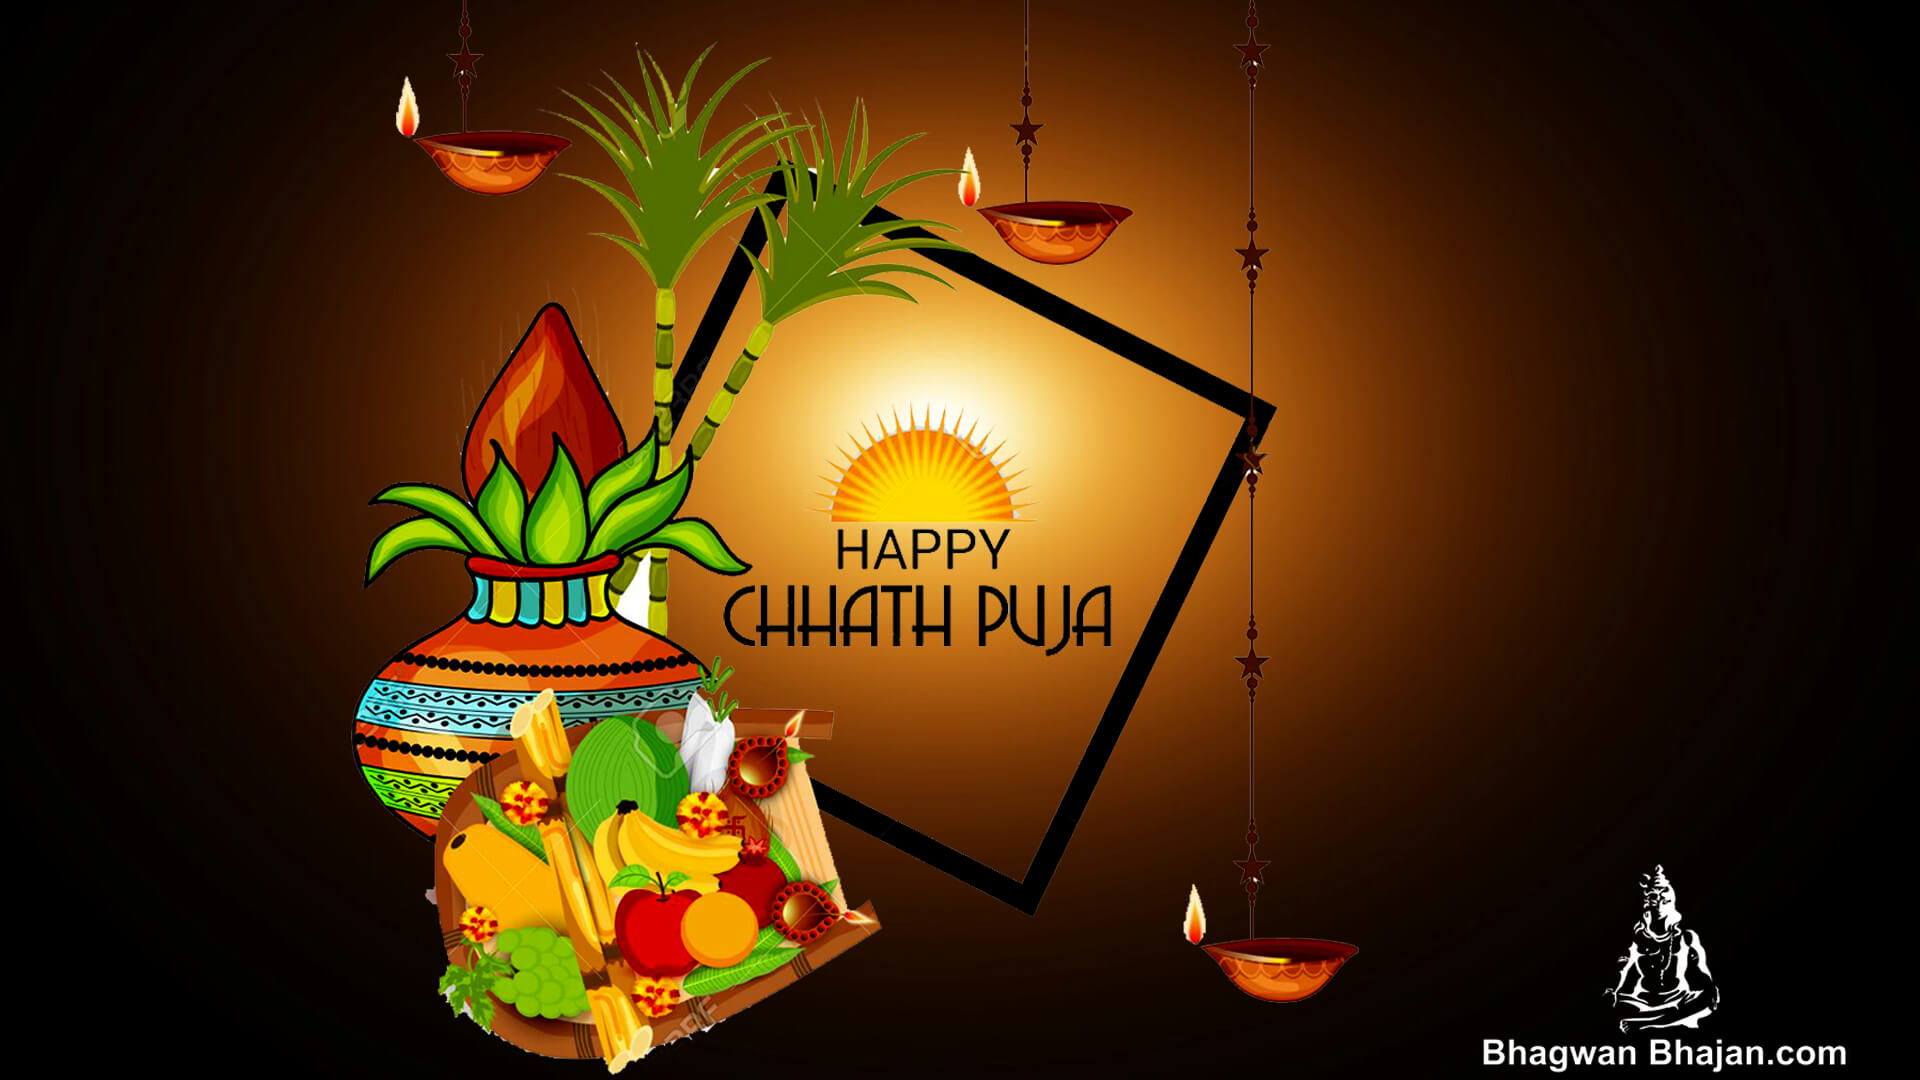 Download Free HD Wallpapers of chhath puja | Dala Chhath Wallpapers | Chhath  HD Images